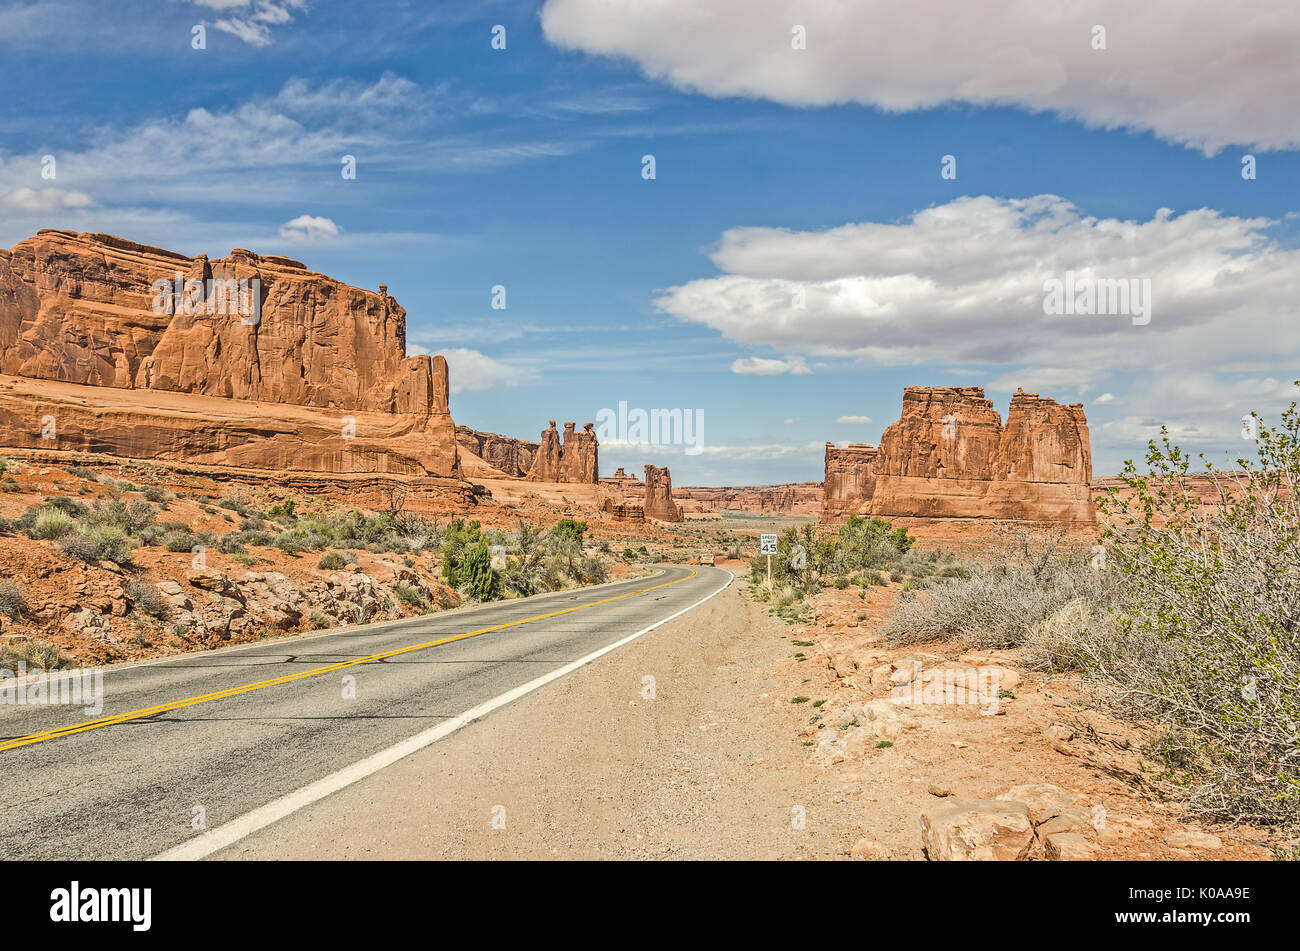 Unique landscape of entrada sandstone formations along a main road in Arches National Park in Moab, Utah Stock Photo